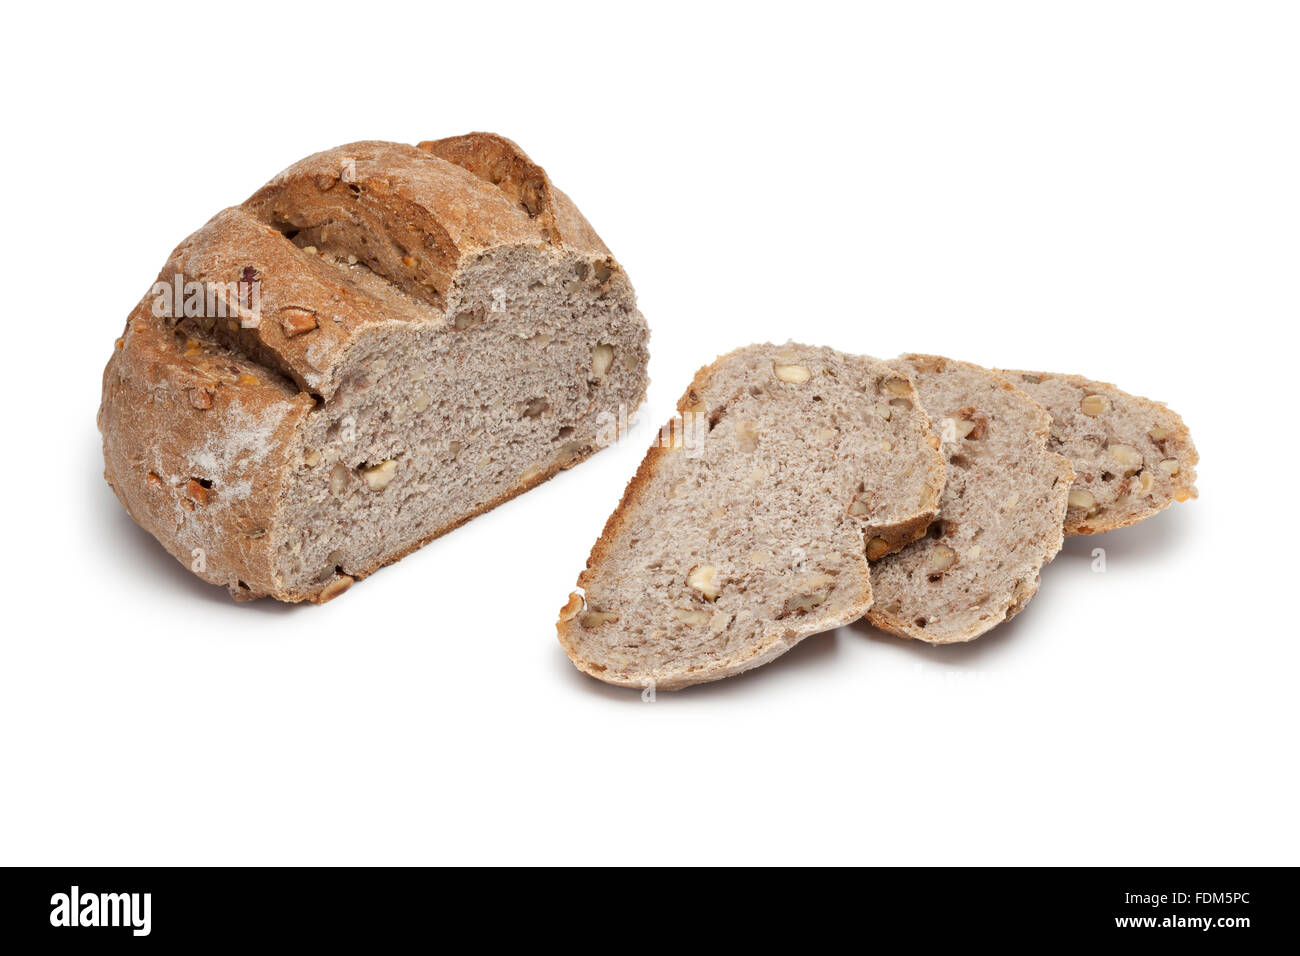 Fresh whole wheat nut bread and  slices on white background Stock Photo